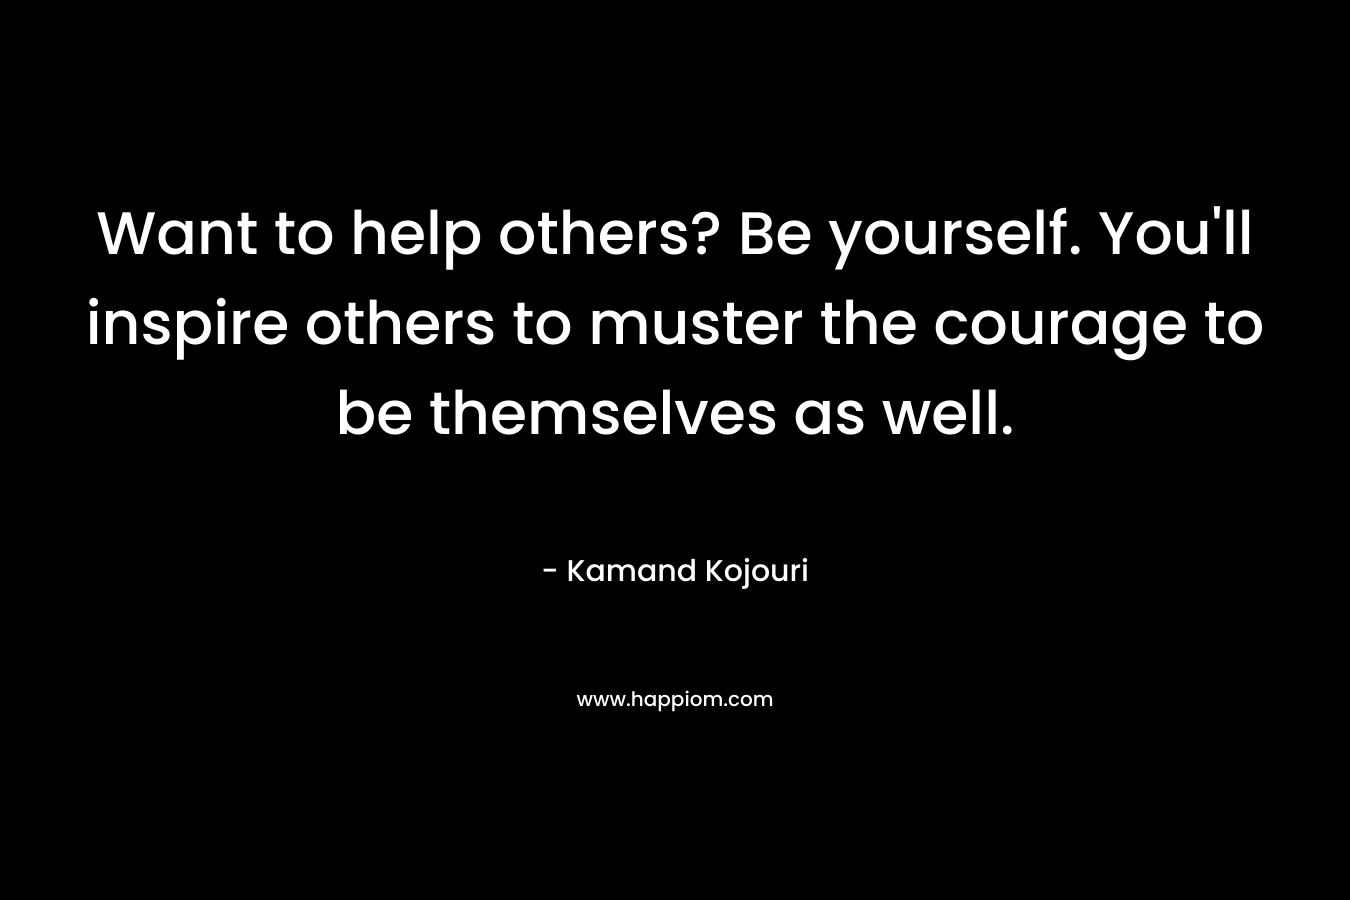 Want to help others? Be yourself. You’ll inspire others to muster the courage to be themselves as well. – Kamand Kojouri